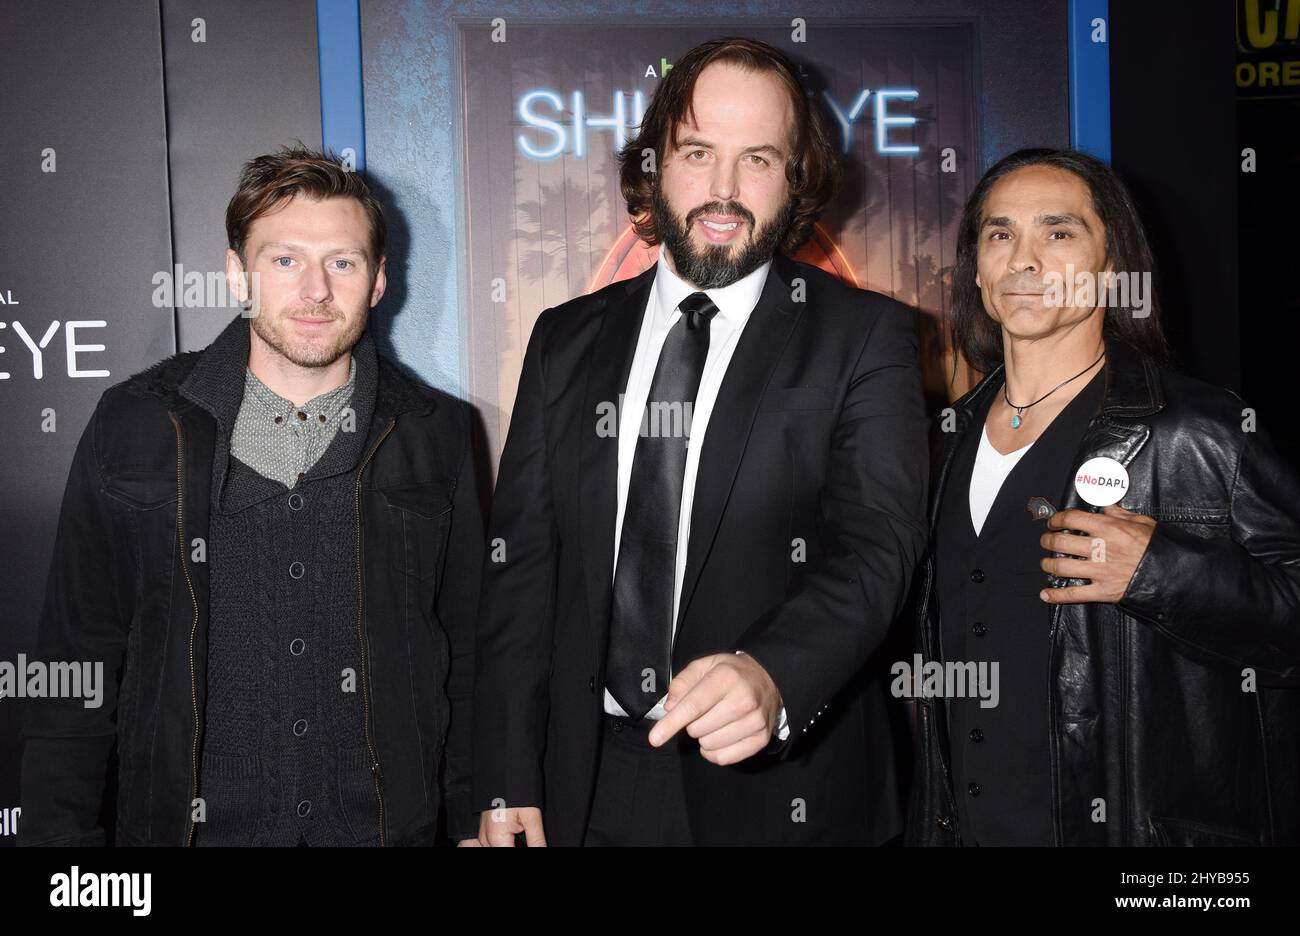 Keir O'Donnell, Angus Sampson and Zahn McClarnon attending the Hulu Original Series "Shut Eye" Premiere held at the ArcLight Cinemas Hollywood Stock Photo